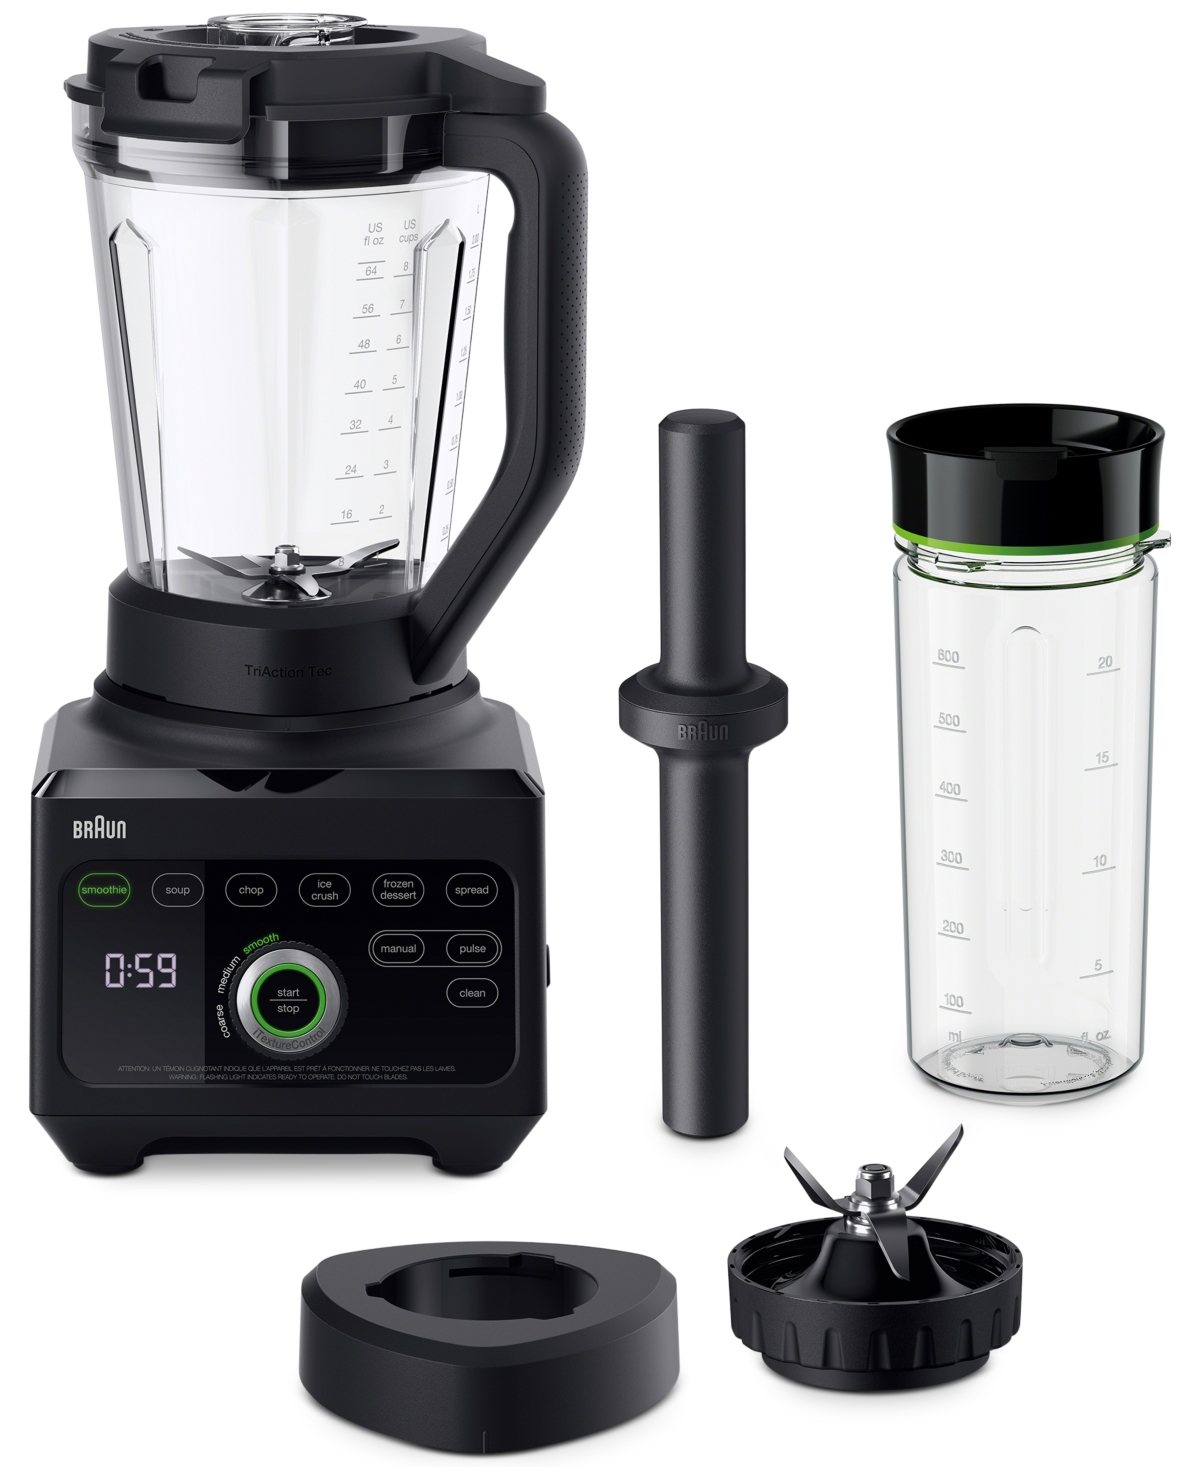 Braun Power Blender with Smoothie2Go JB9041BK & Reviews Small Appliances - -